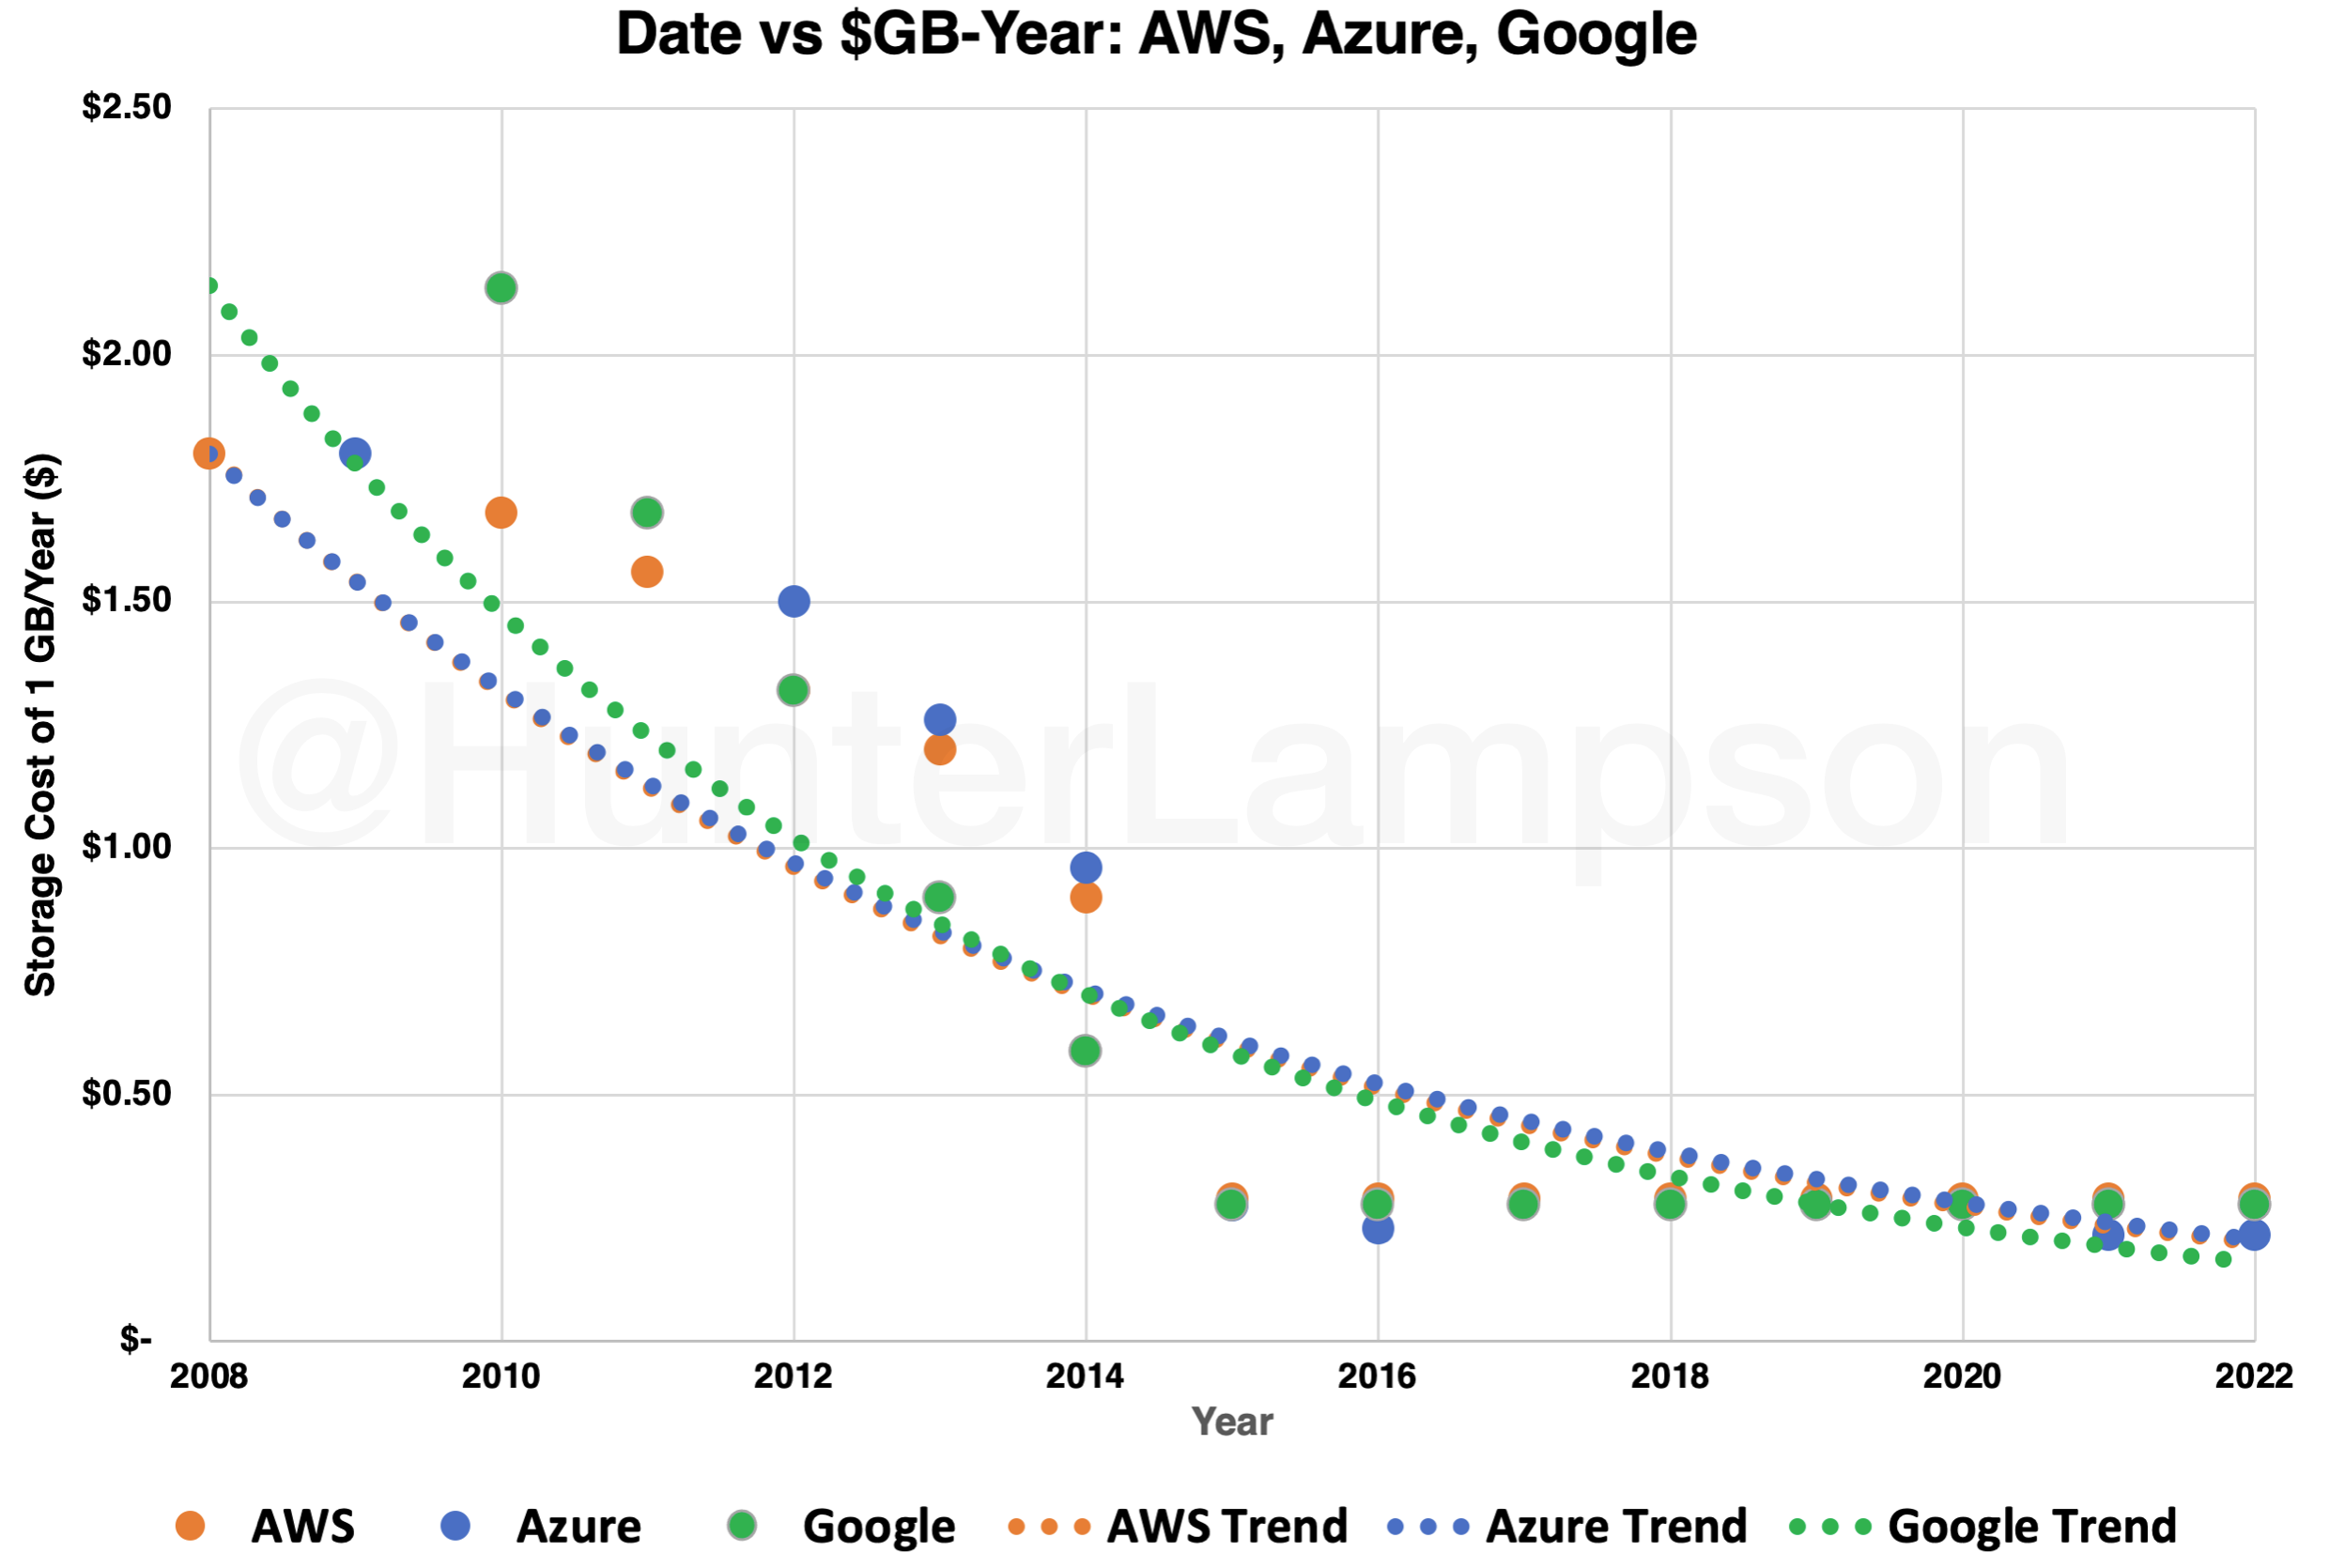 Figure 4. Cost of data storage over time on AWS, Azure, Google. Sources: AWS, Azure, Google, Hunter Lampson.